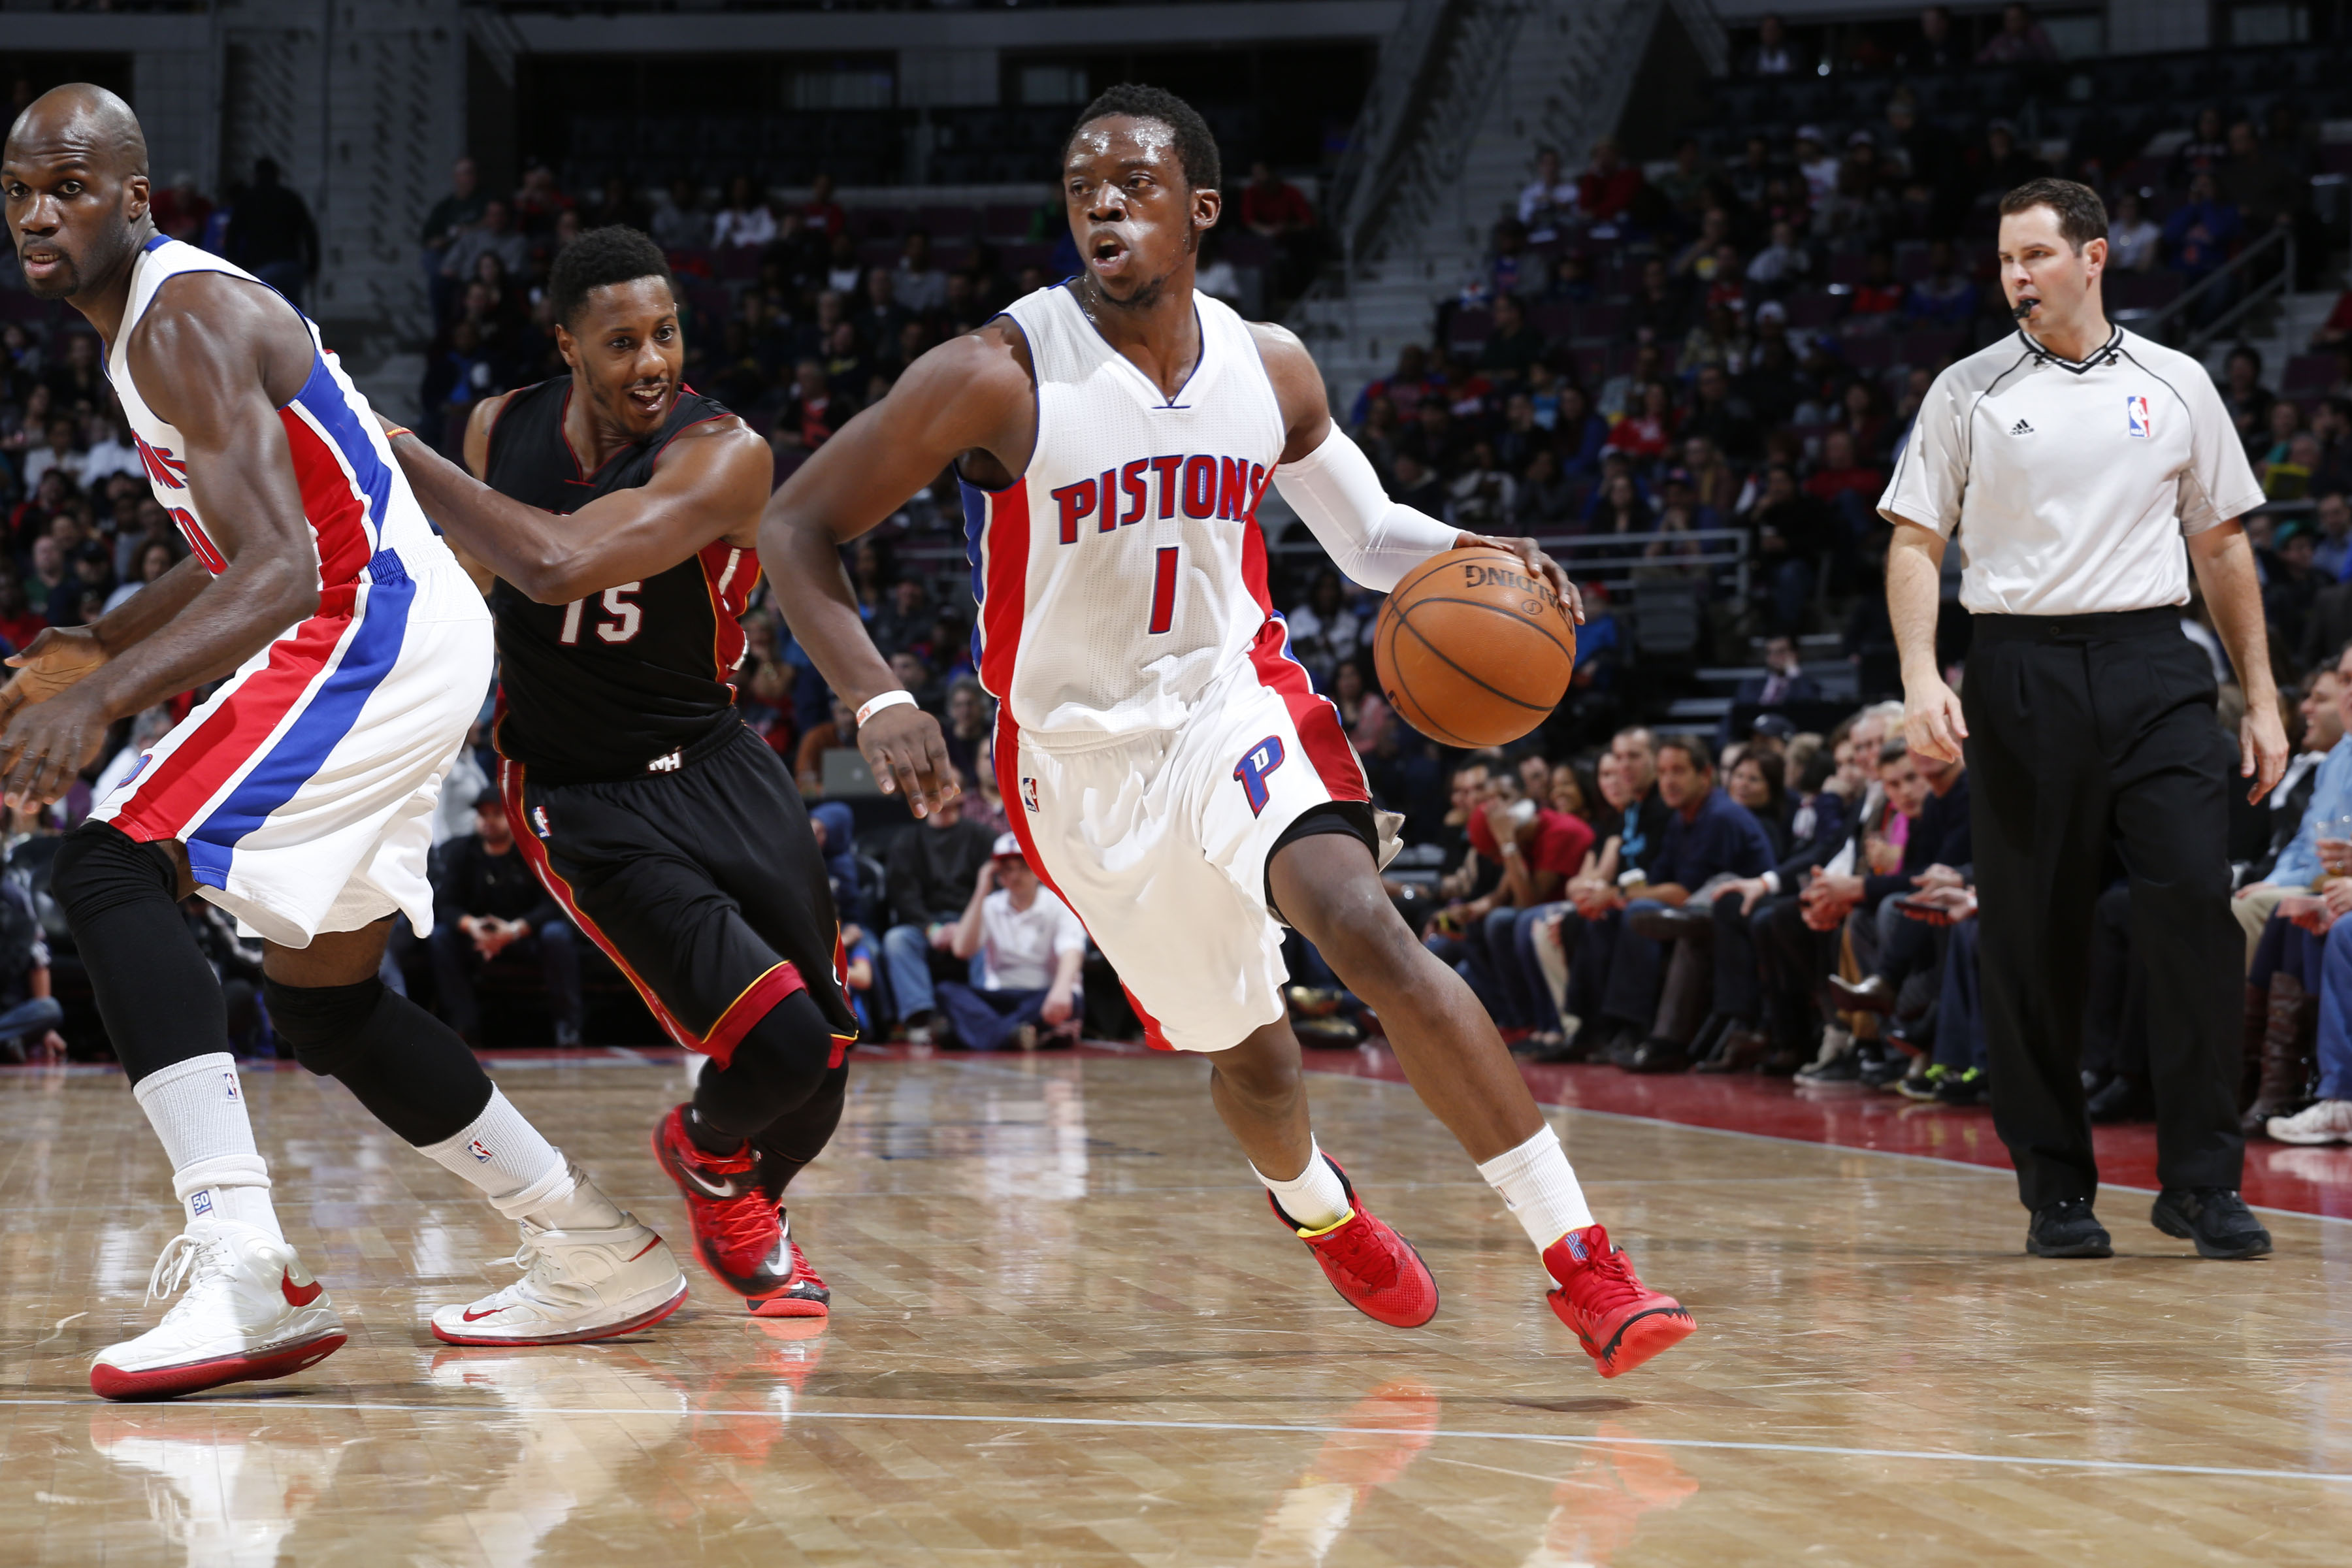 AUBURN HILLS, MI - APRIL 4: Reggie Jackson #1 of the Detroit Pistons looks to move the ball against the Miami Heat during the game on April 4, 2015 at The Palace of Auburn Hills in Auburn Hills, Michigan. (Photo by B. Sevald/Einstein/NBAE via Getty Images)